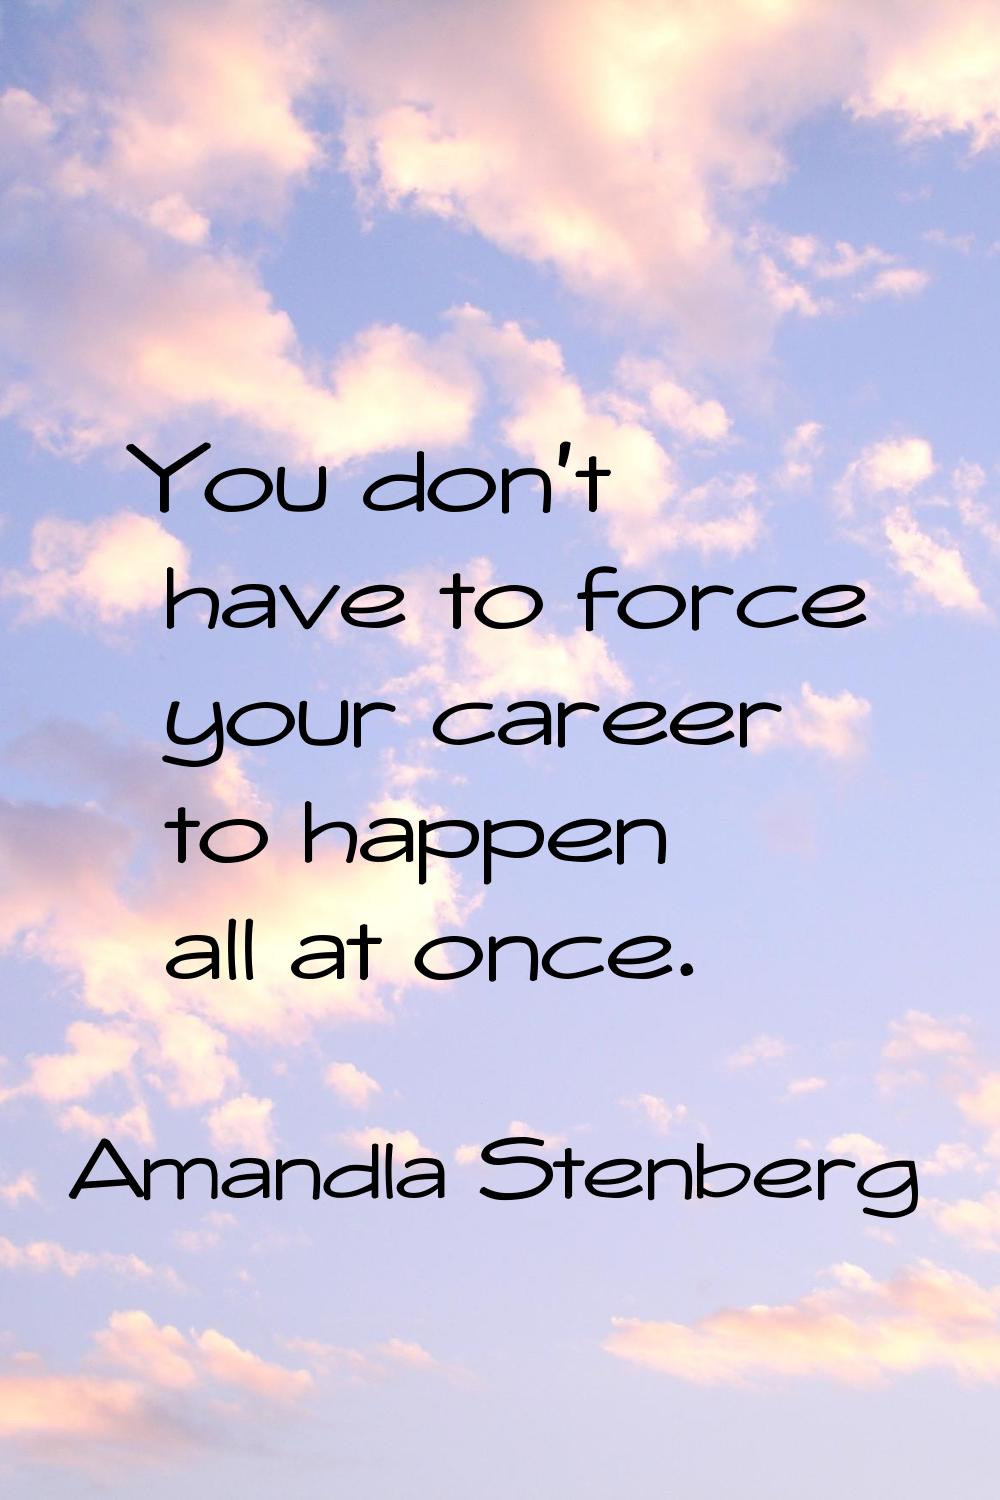 You don't have to force your career to happen all at once.